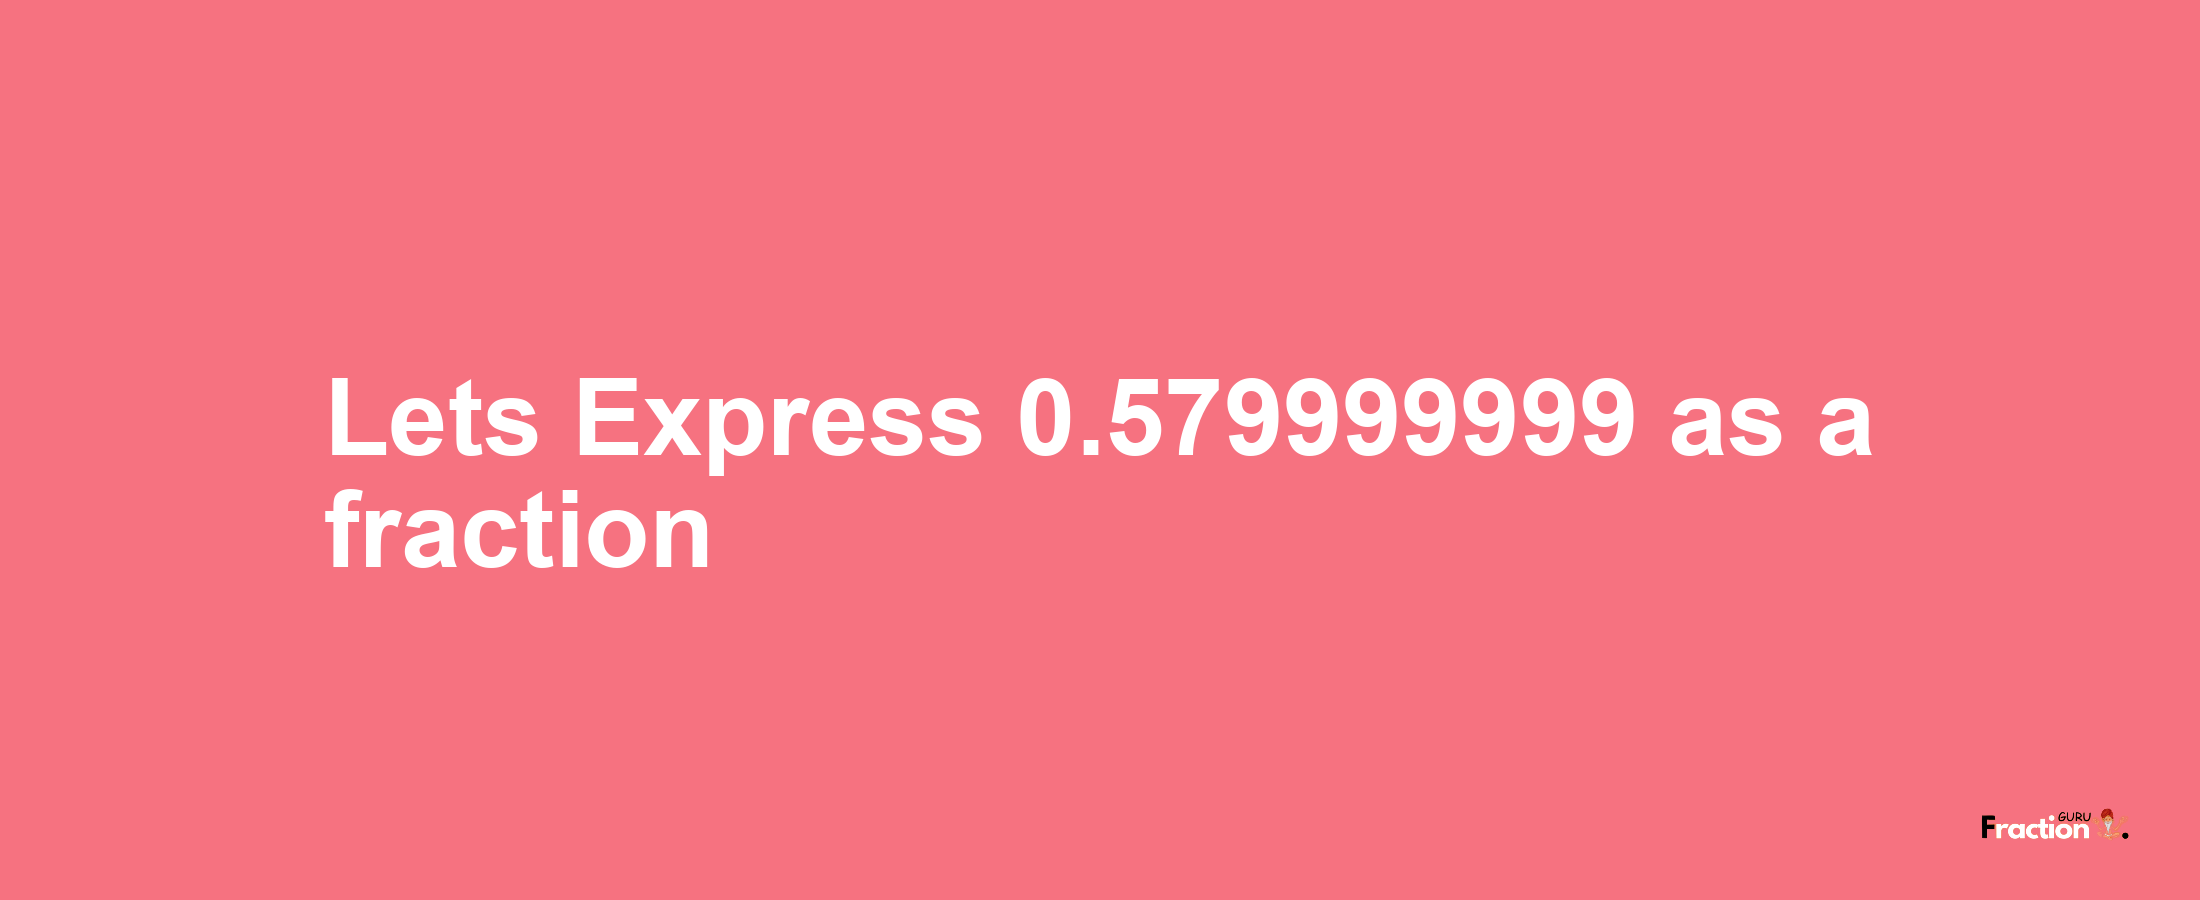 Lets Express 0.579999999 as afraction